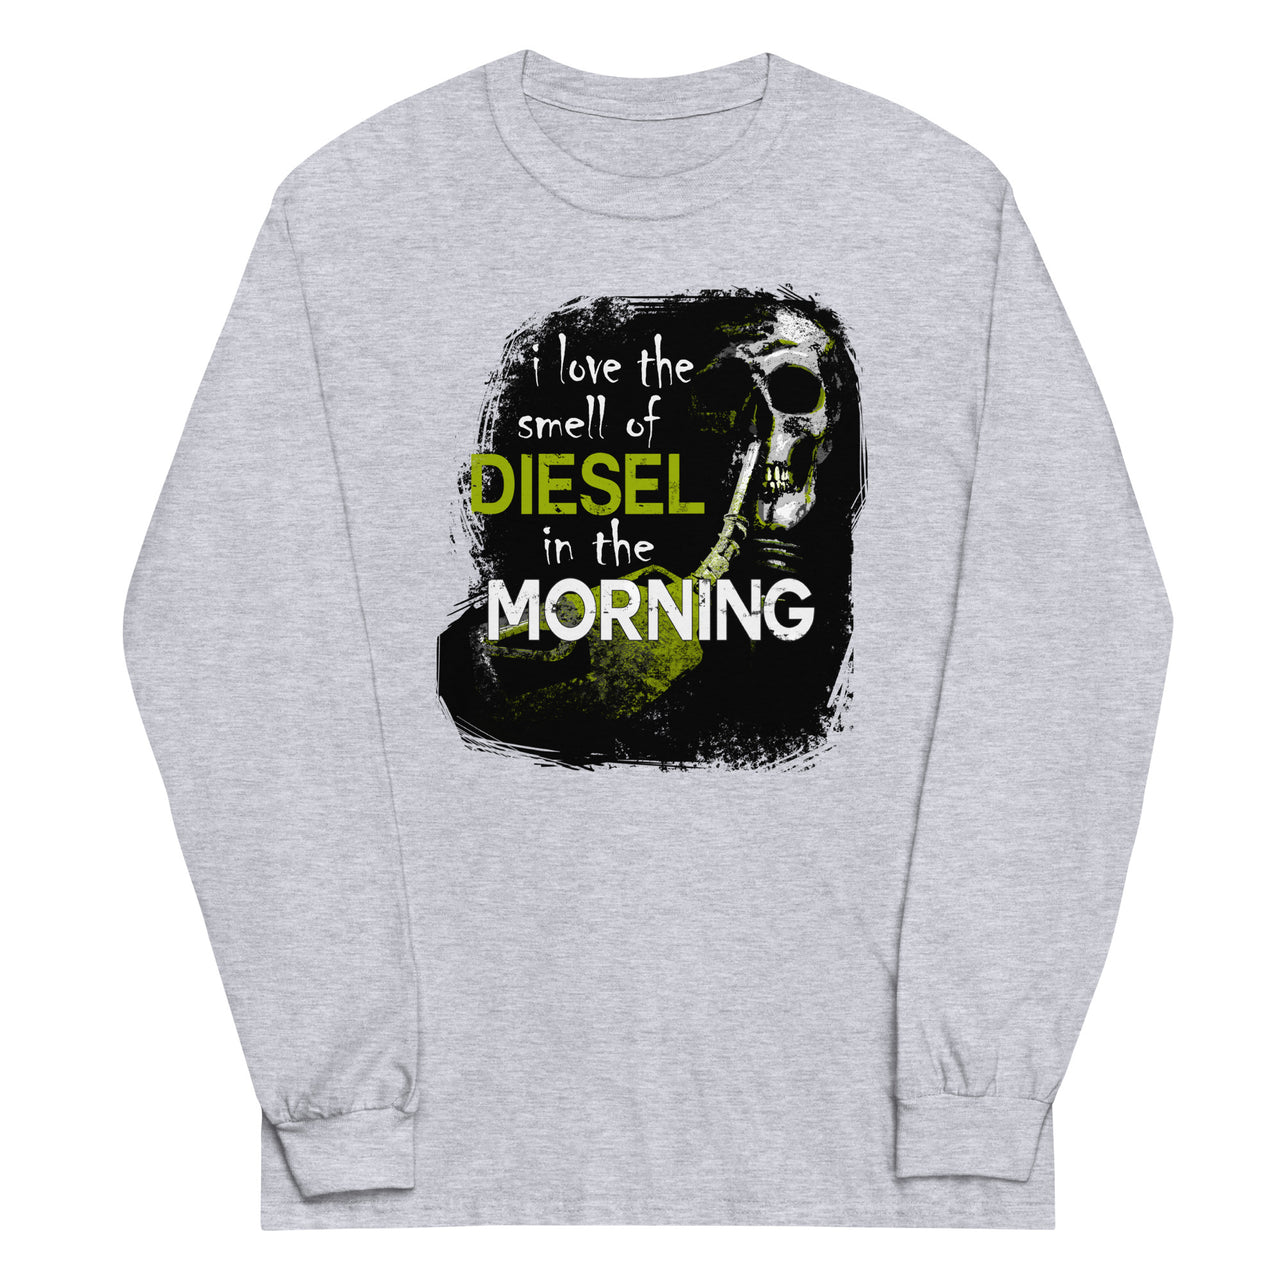 Truck Long Sleeve T-Shirt - I Love The Smell of Diesel In The Morning in sport grey